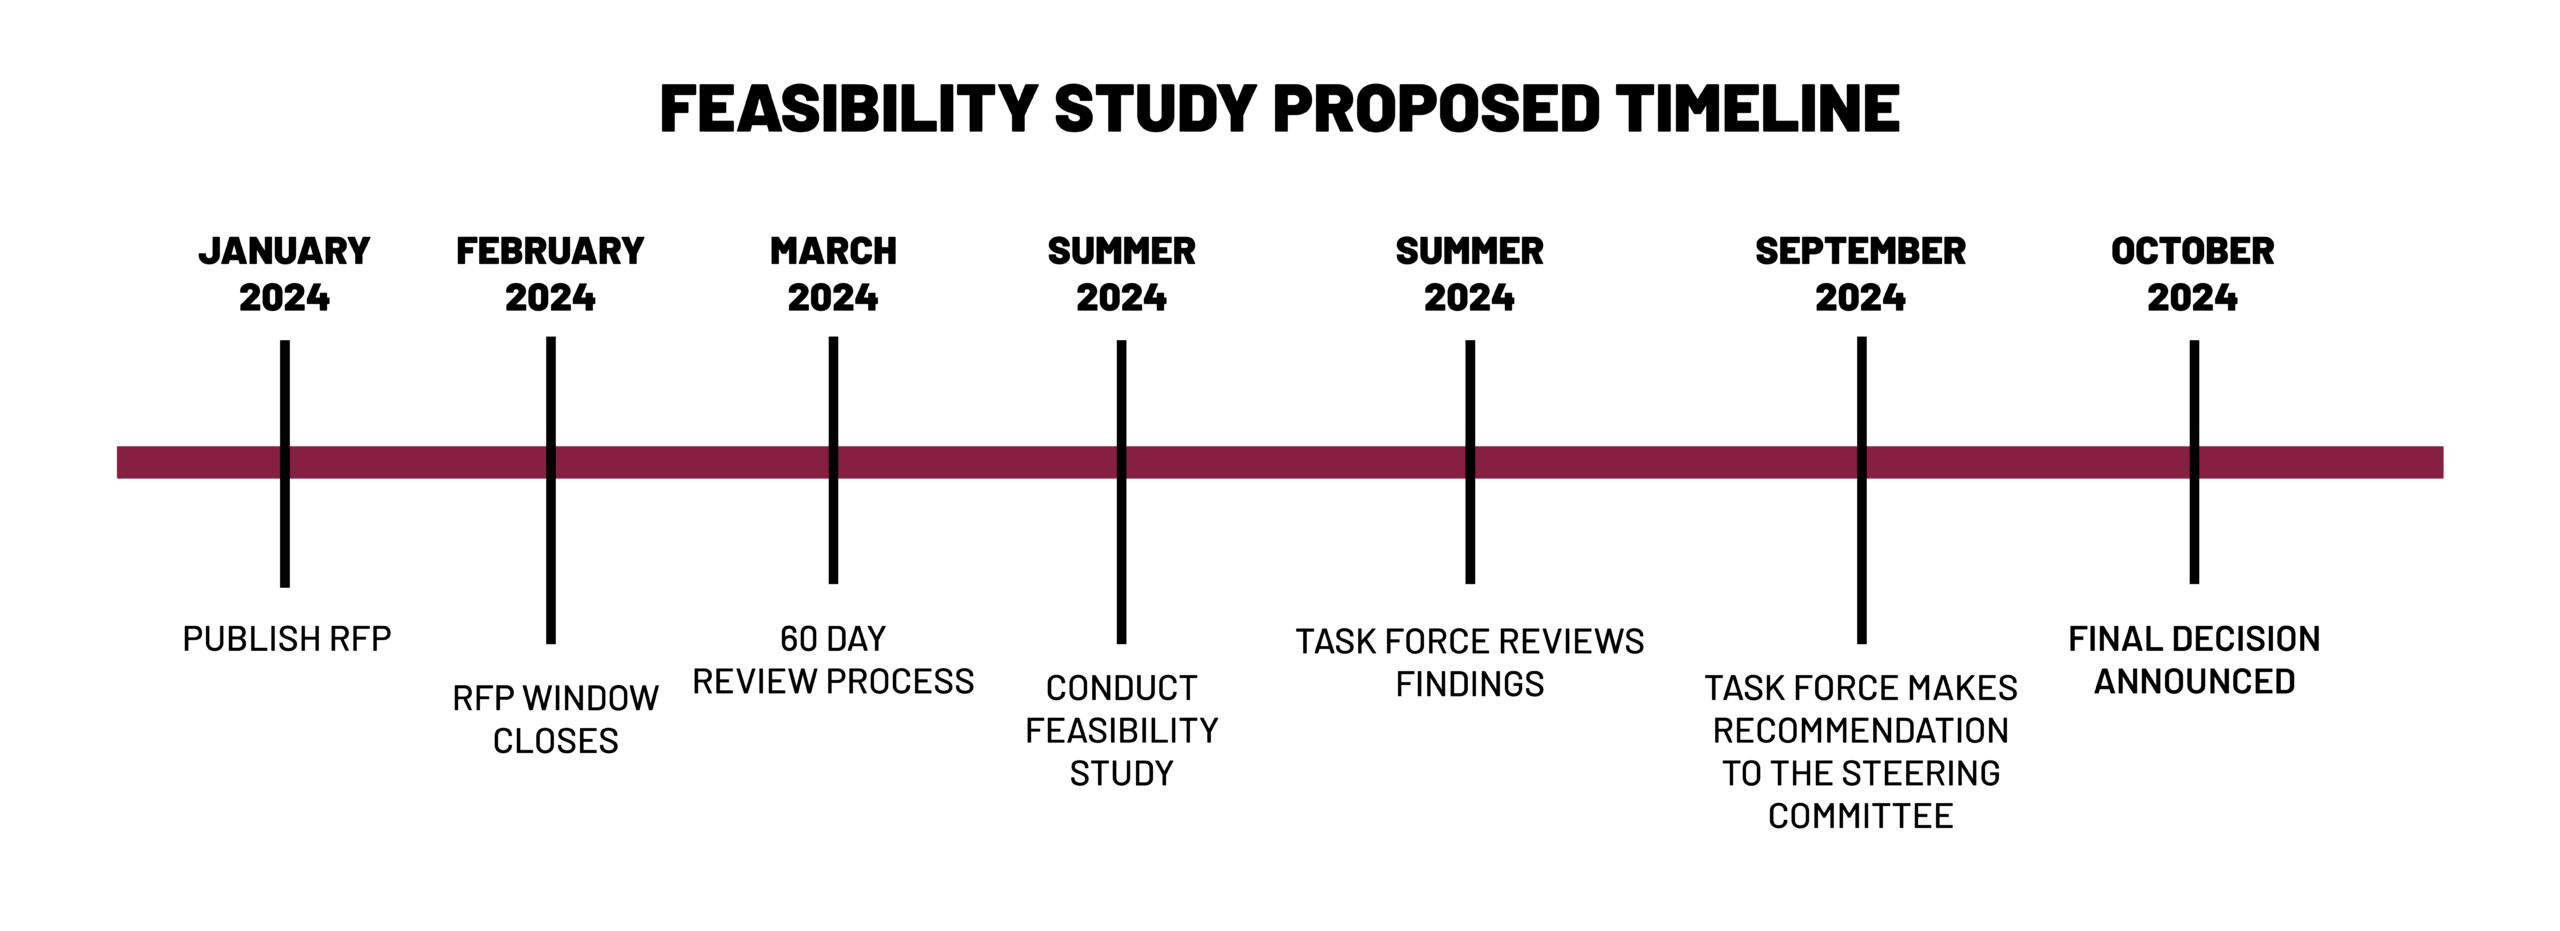 feasibility study proposed timeline beginning in January 2024 and concluding in October 2024